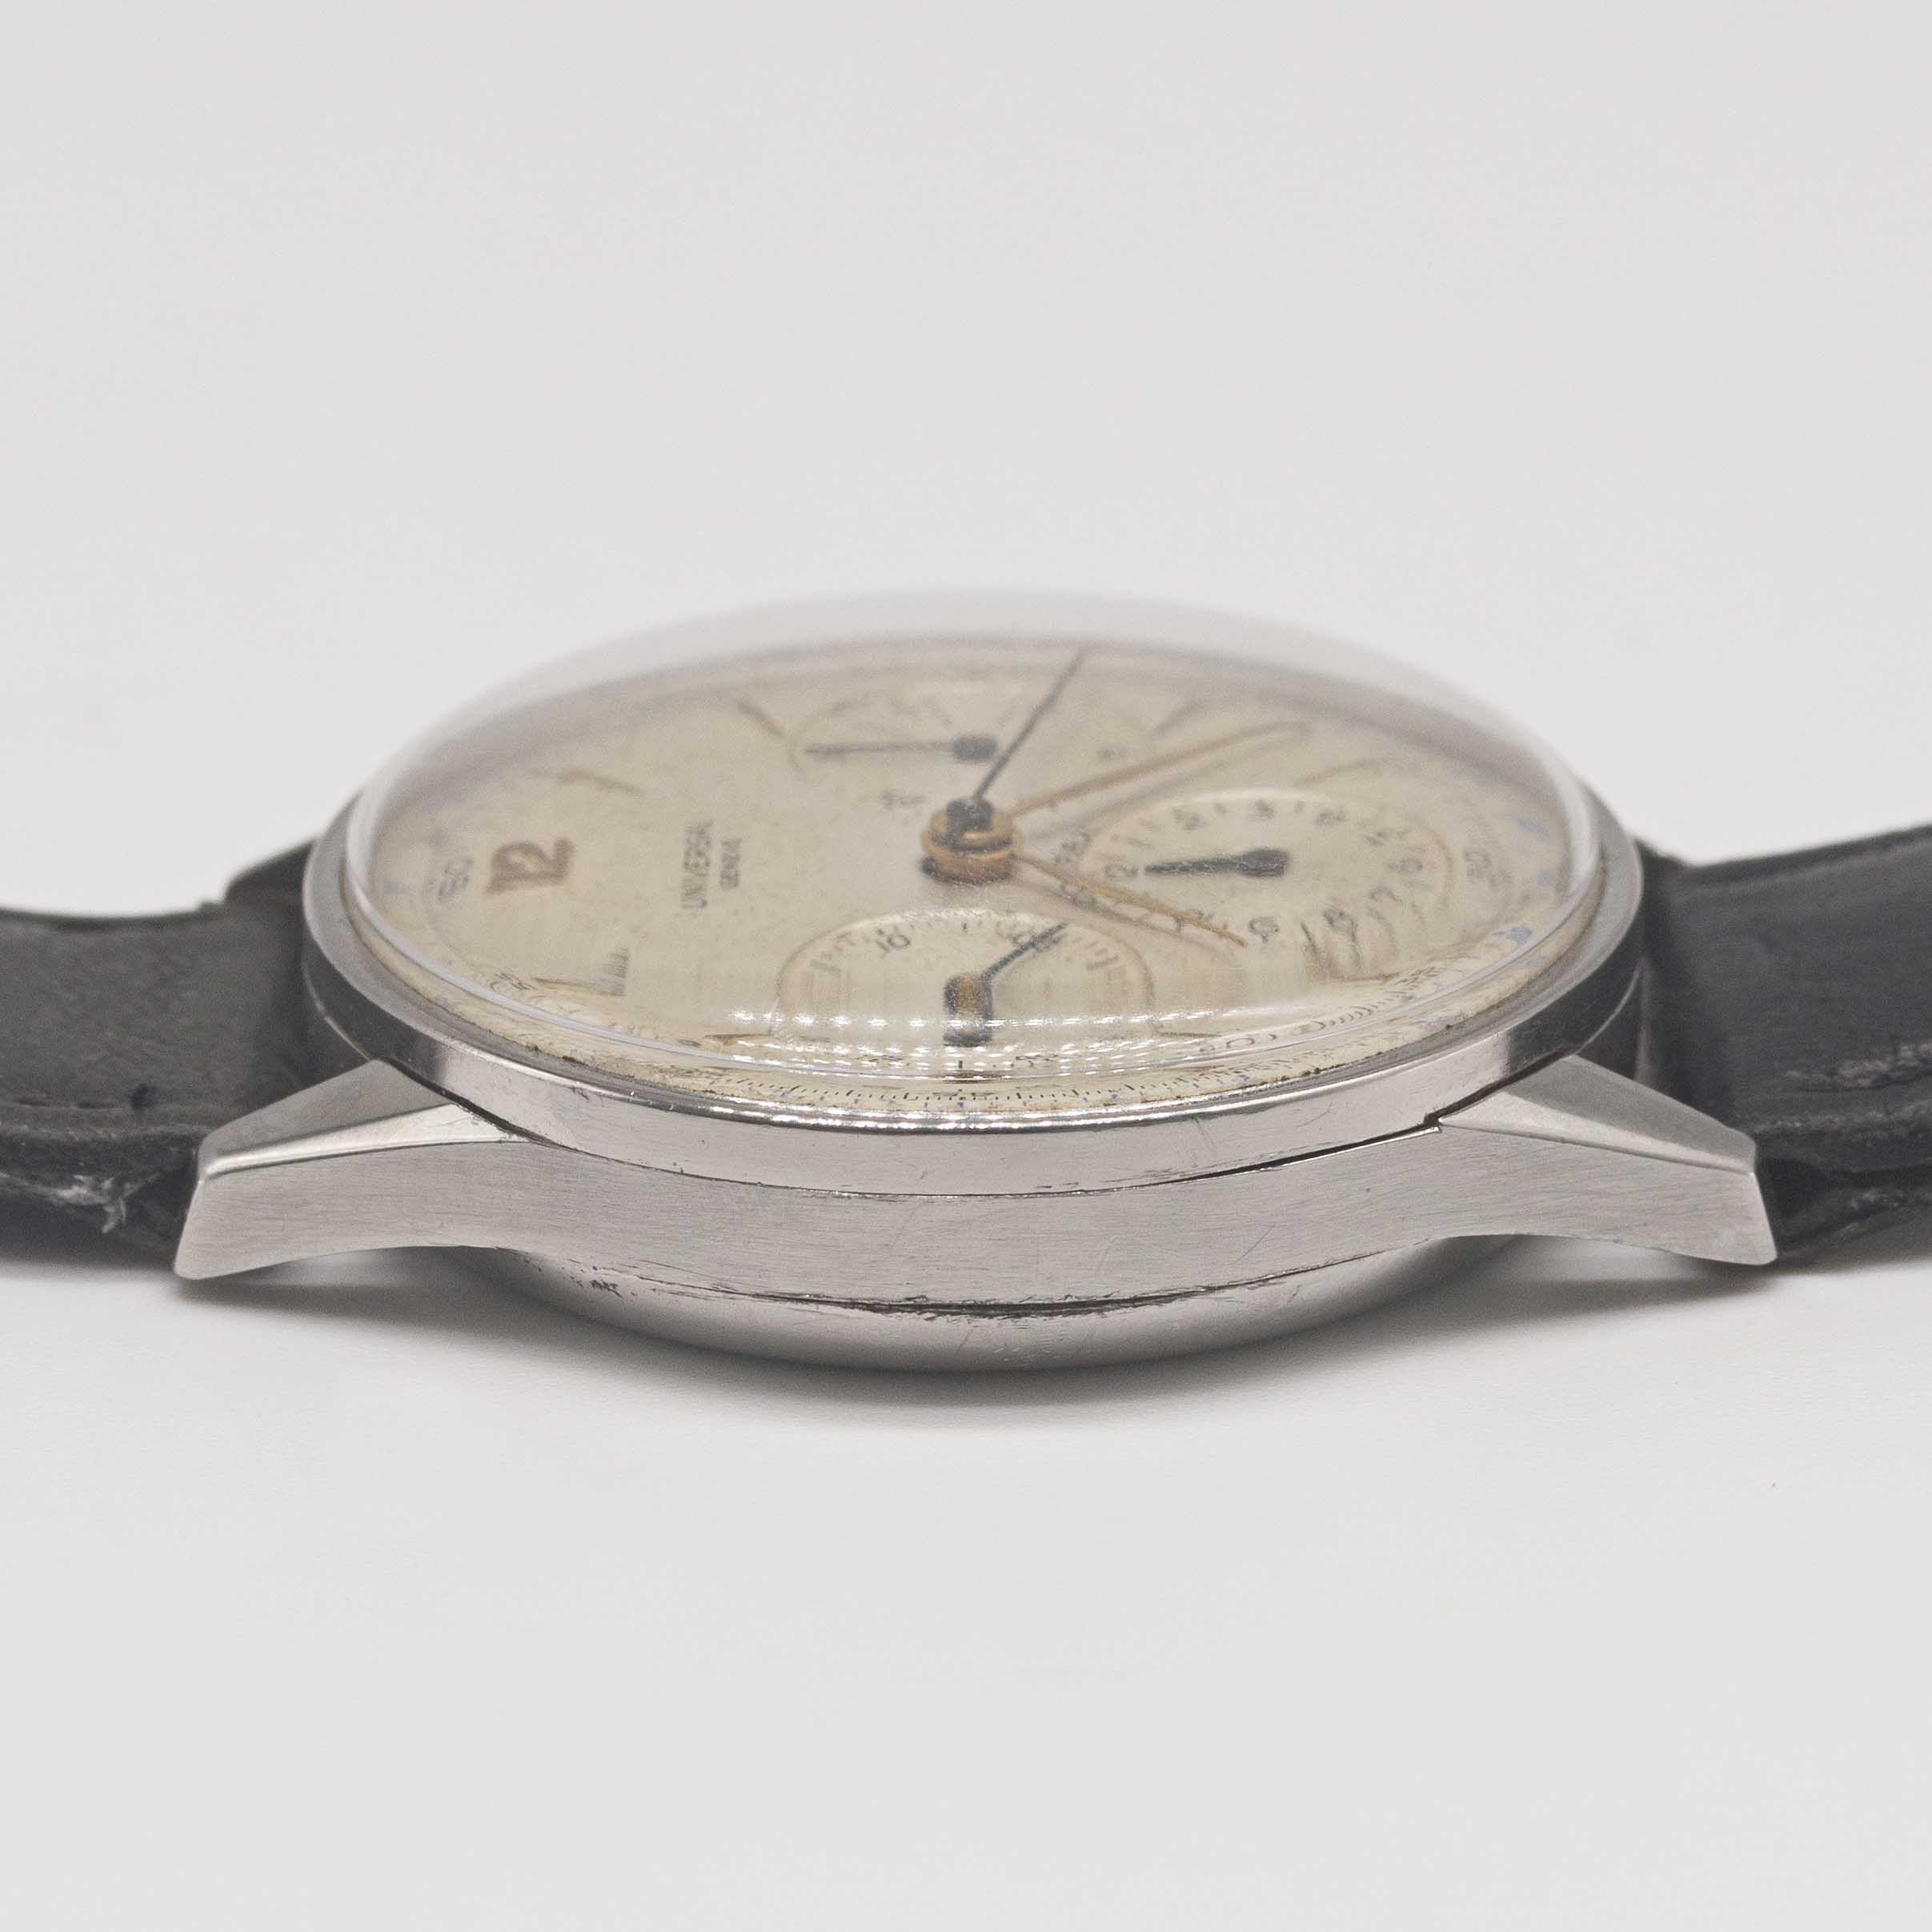 A GENTLEMAN'S LARGE SIZE STAINLESS STEEL UNIVERSAL GENEVE COMPAX CHRONOGRAPH WRIST WATCH CIRCA 1950, - Image 9 of 9